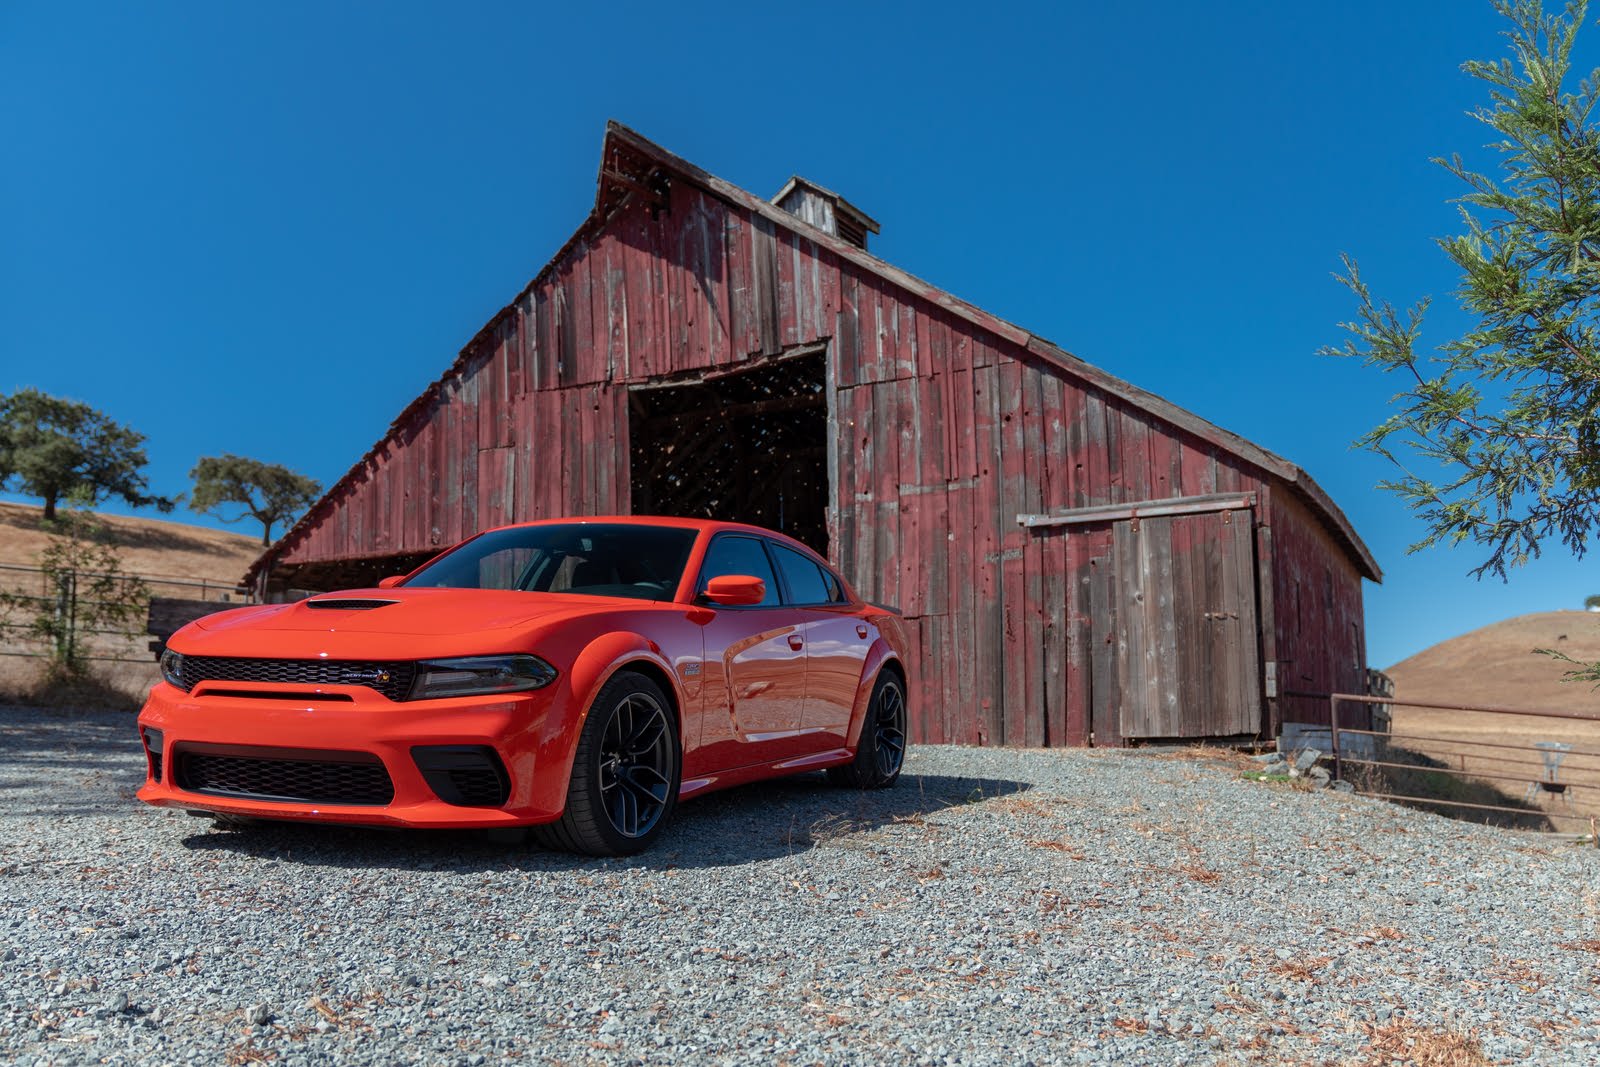 2020 Dodge Charger: Prices, Reviews & Pictures - CarGurus